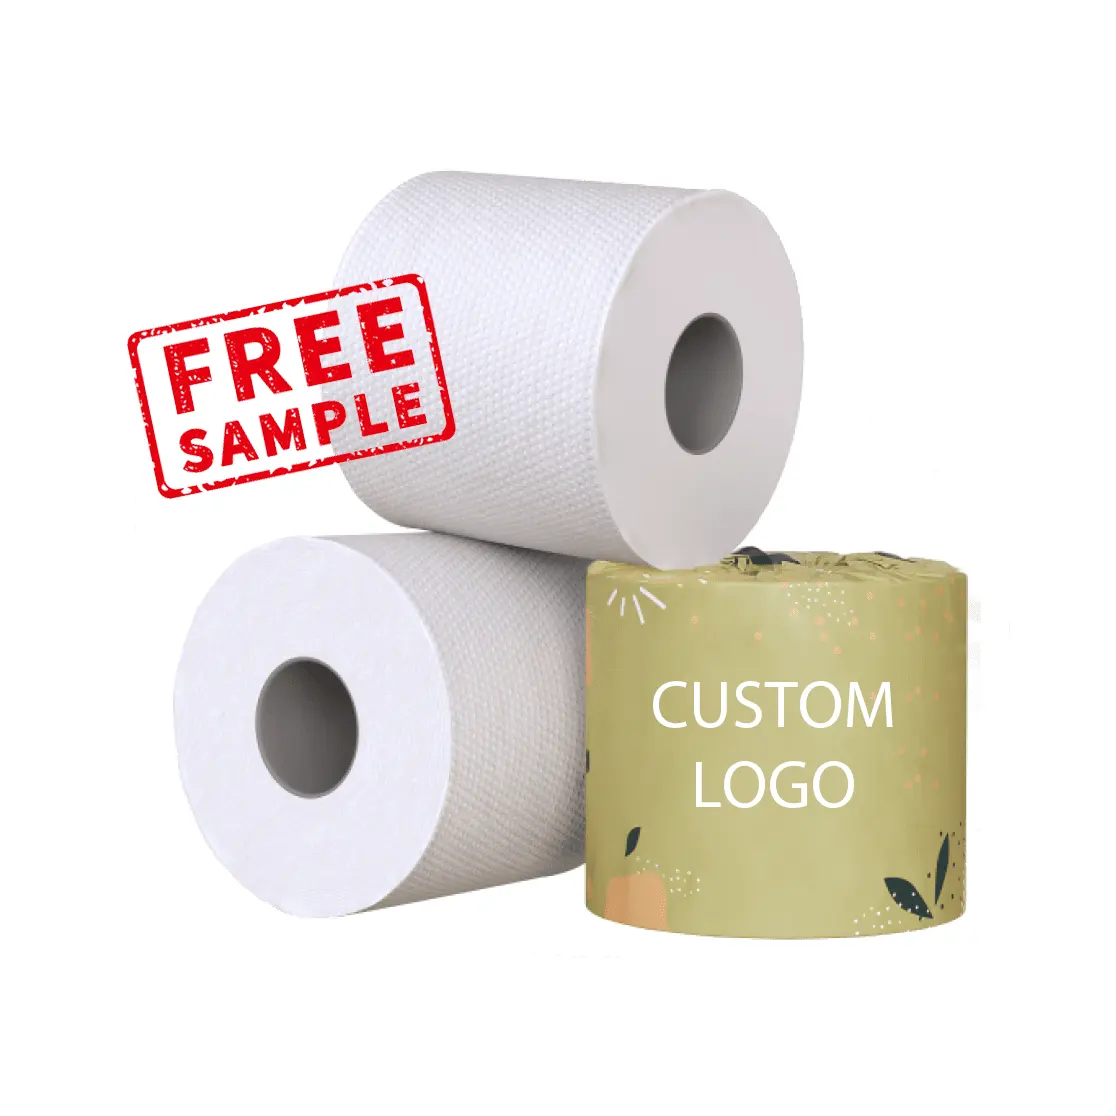 Wholesale Biodegradable Premium Quality Customized Brand 3Ply 100% Pulp Toilet Paper High Quality